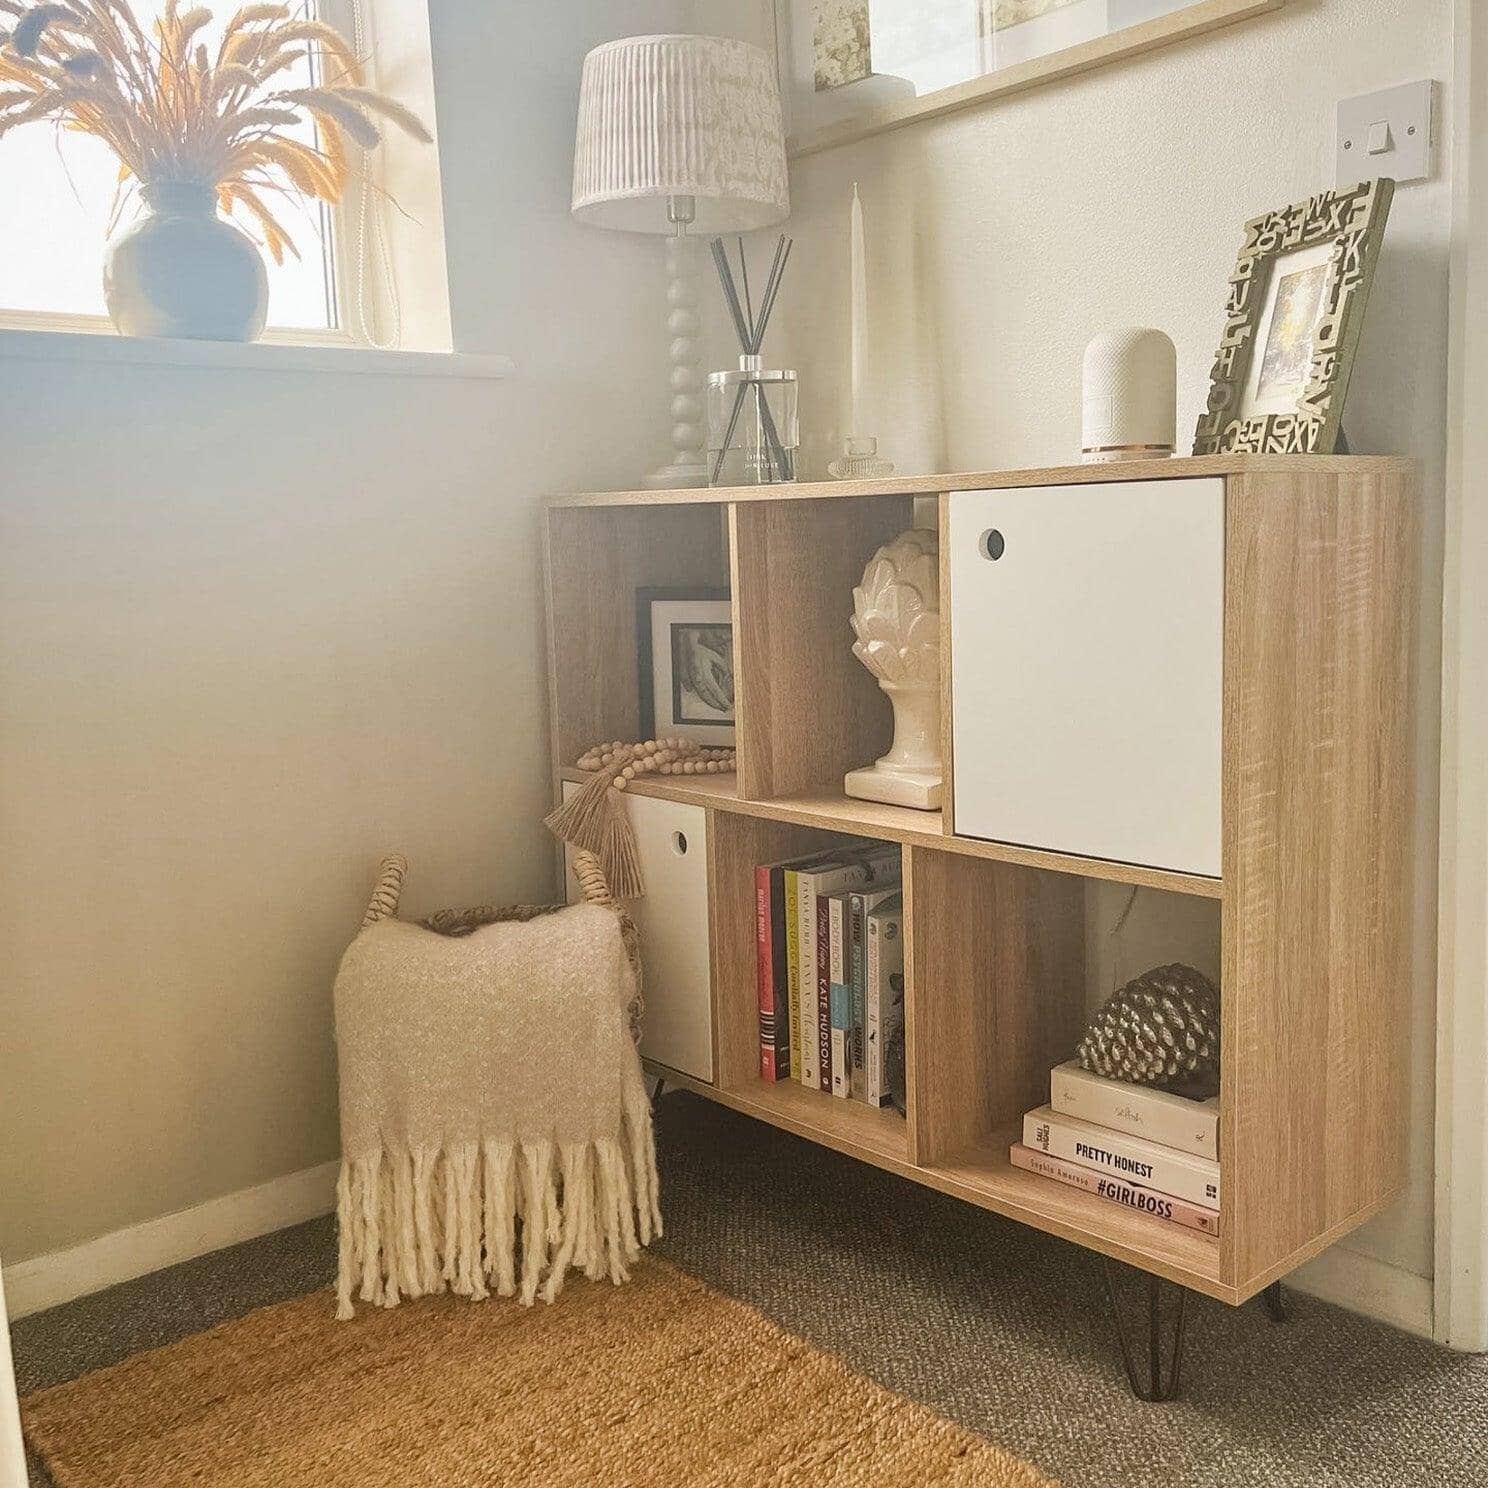 Anderson cube storage unit - Oak effect with white cupboards - Laura James